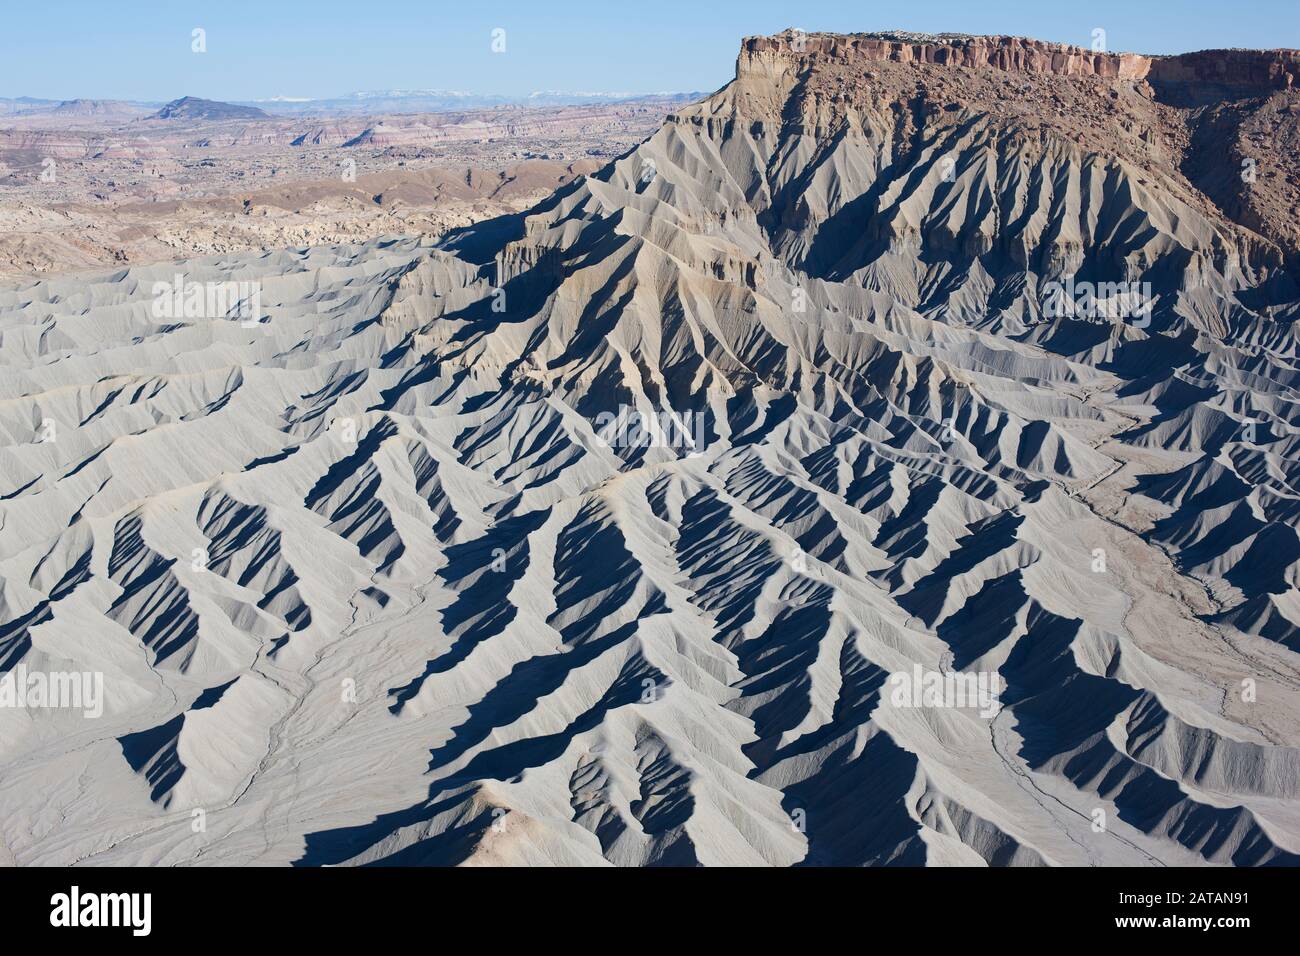 AERIAL VIEW. Landscape of grayish badlands at the foothills of a mesa. Caineville, Utah, USA. Stock Photo